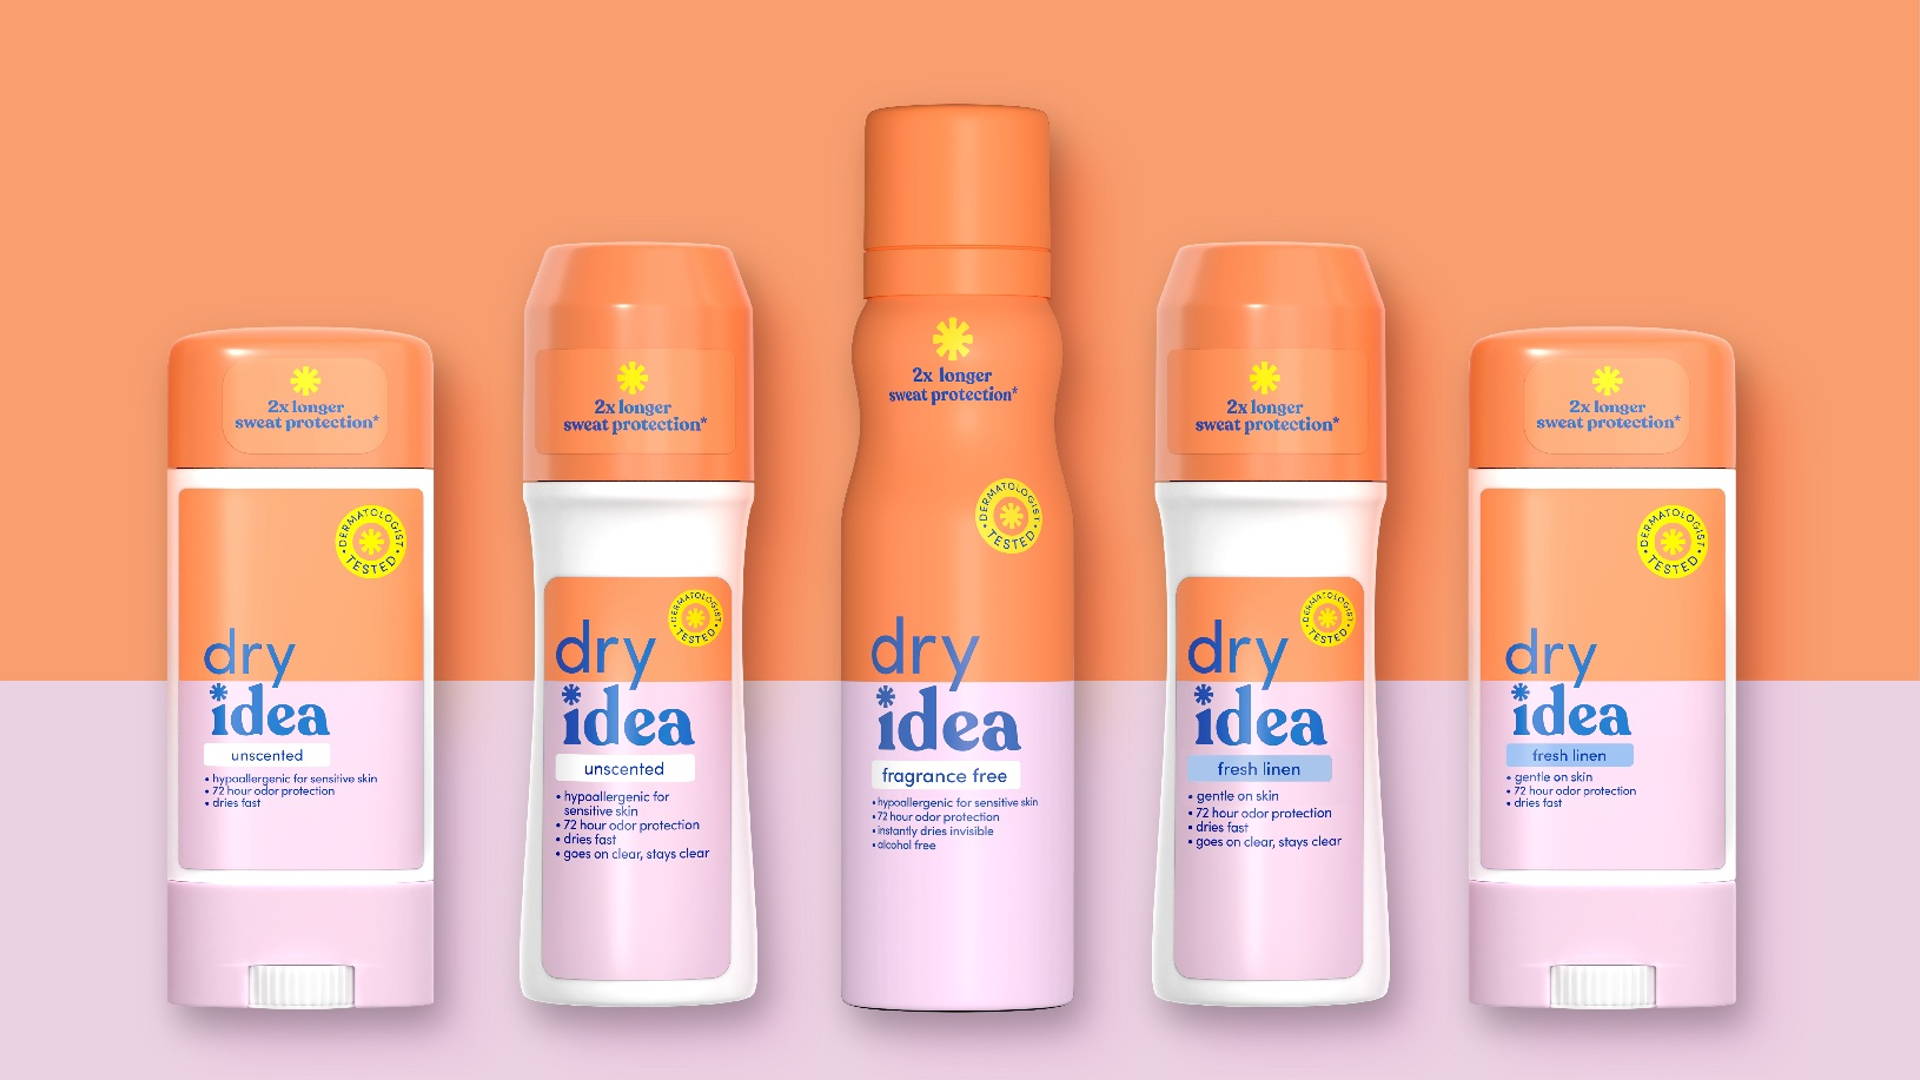 Featured image for This Ain’t Your Mama’s Antiperspirant: Soulsight Refreshes Dry Idea’s Brand Identity